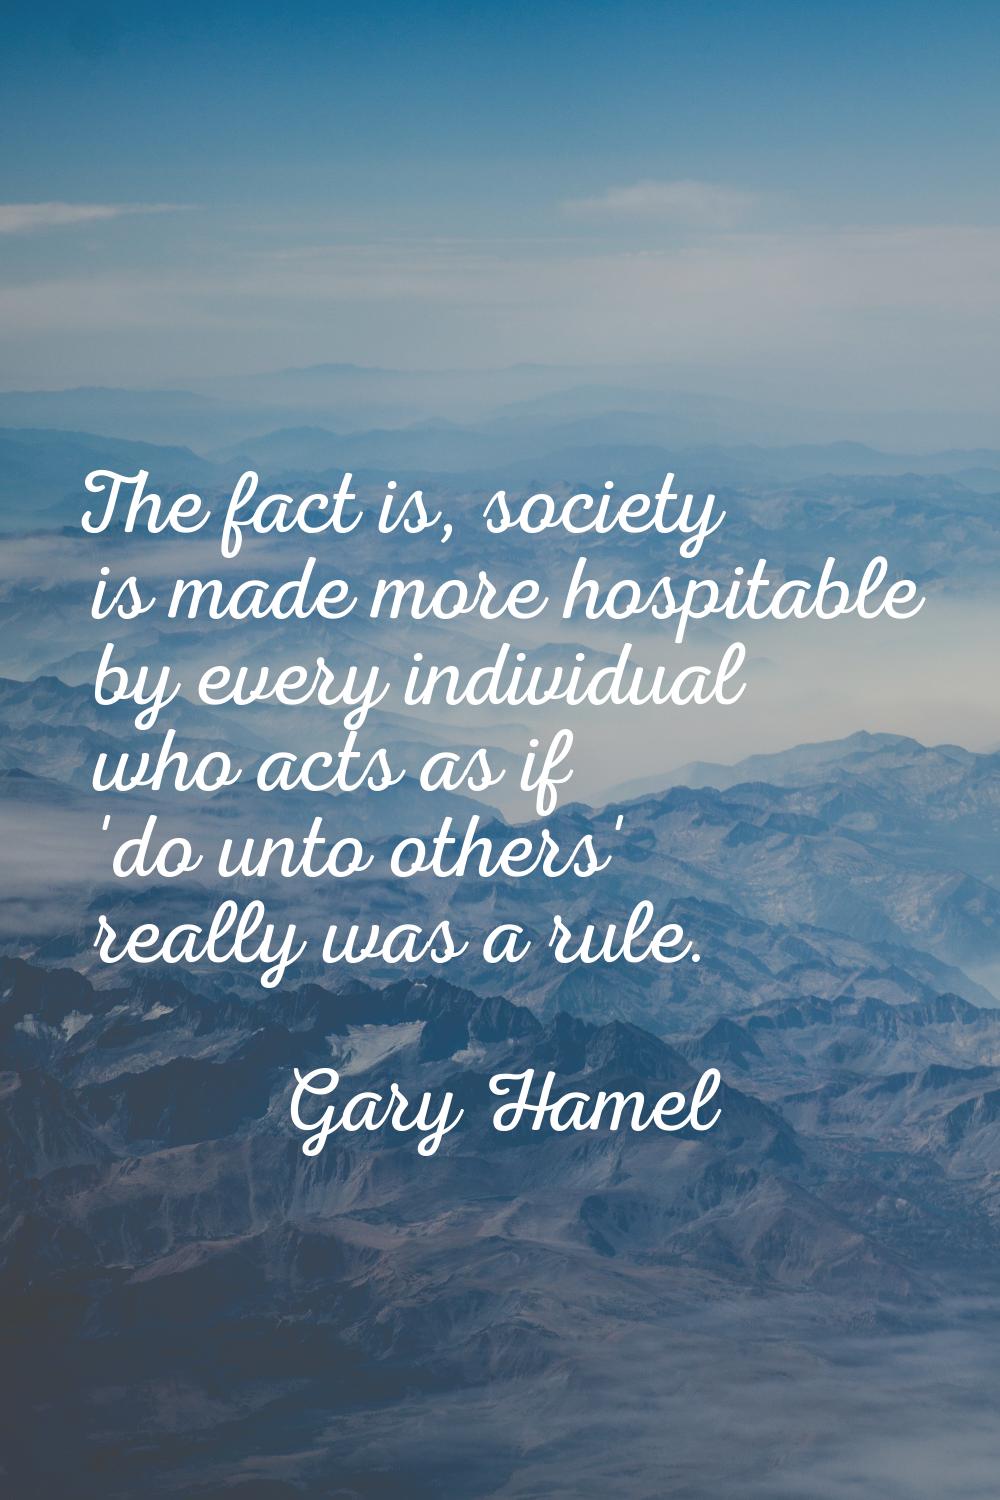 The fact is, society is made more hospitable by every individual who acts as if 'do unto others' re